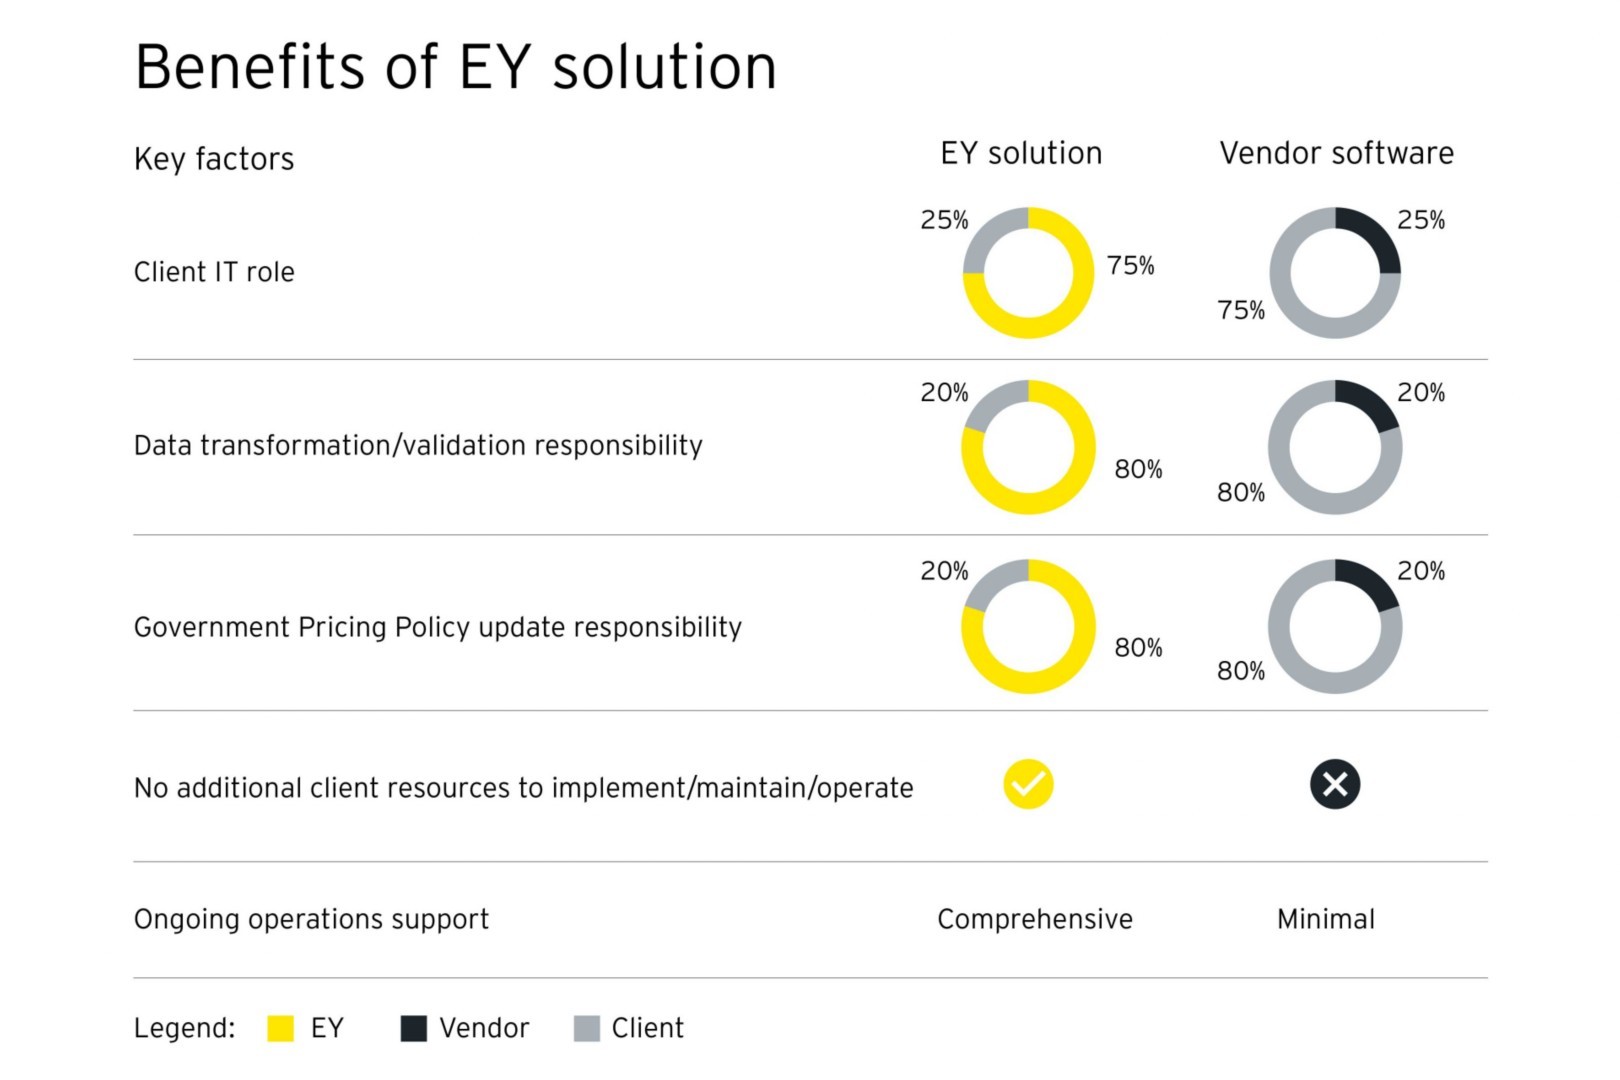 ey-benefits-of-ey-solution